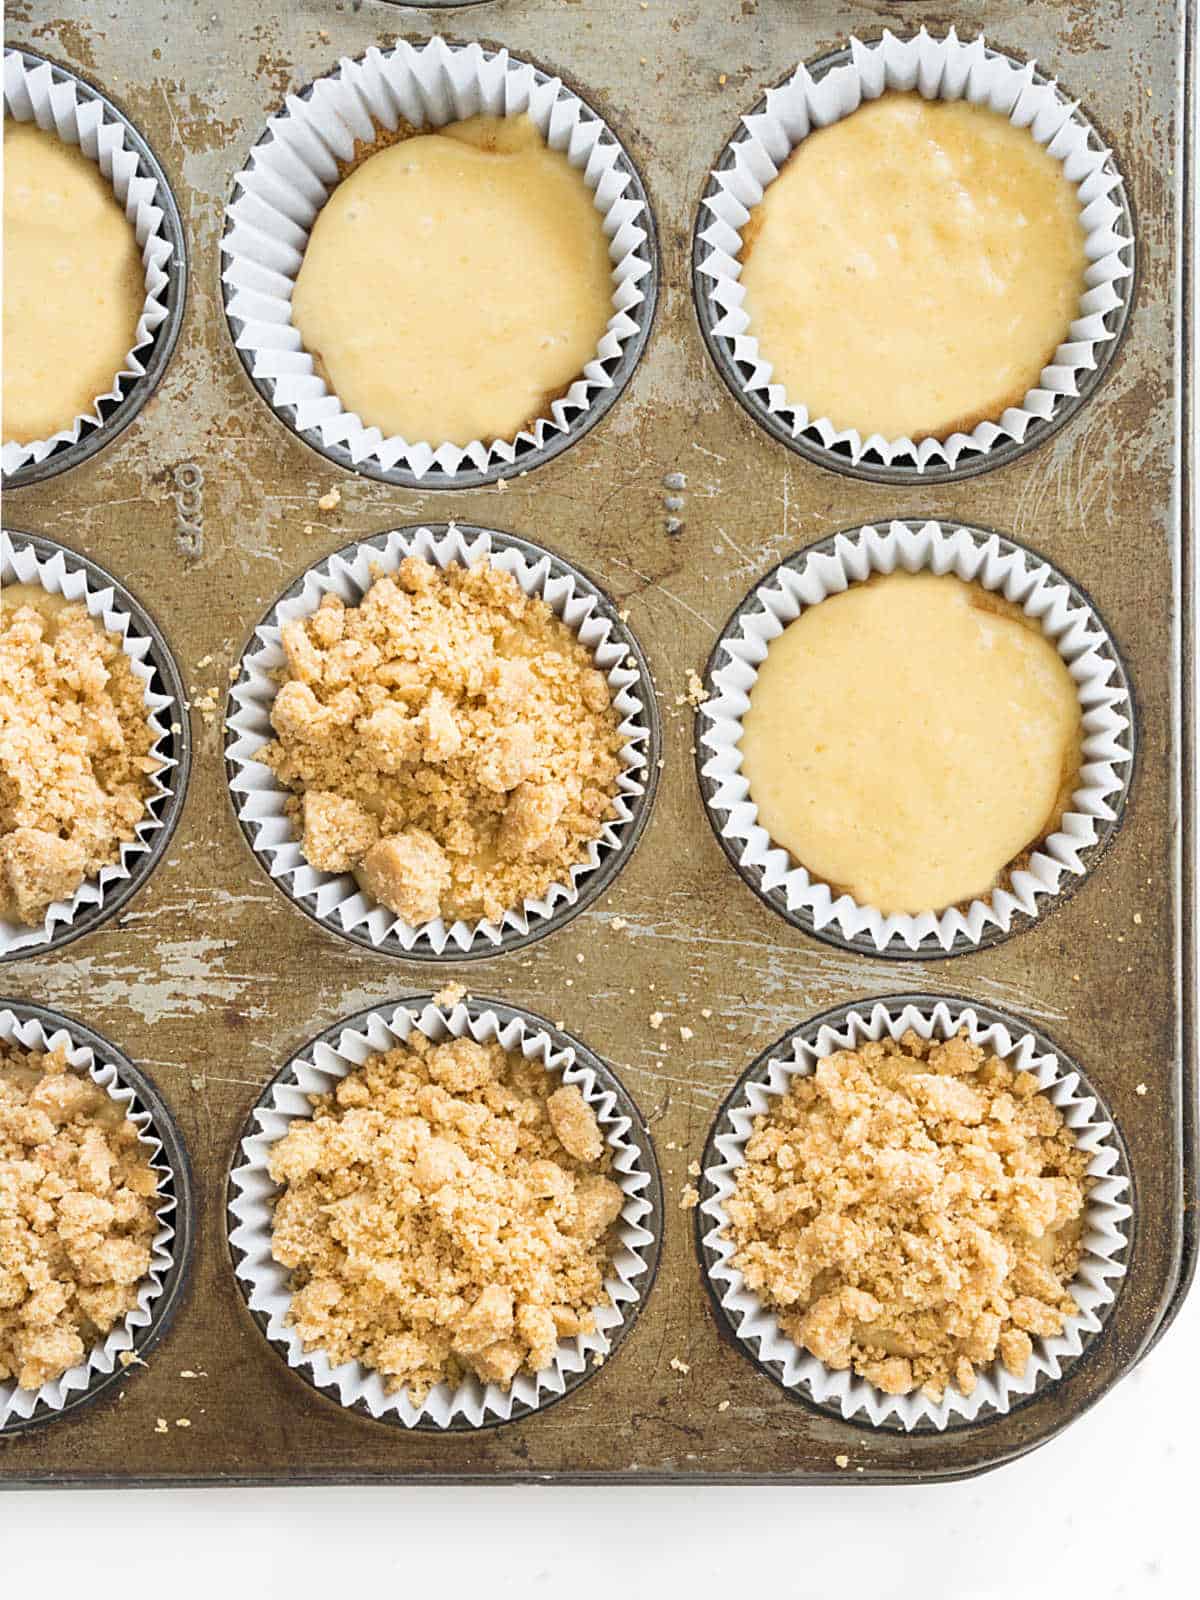 Metal muffin pan with unbaked cinnamon muffins, some with crumble, some plain. 